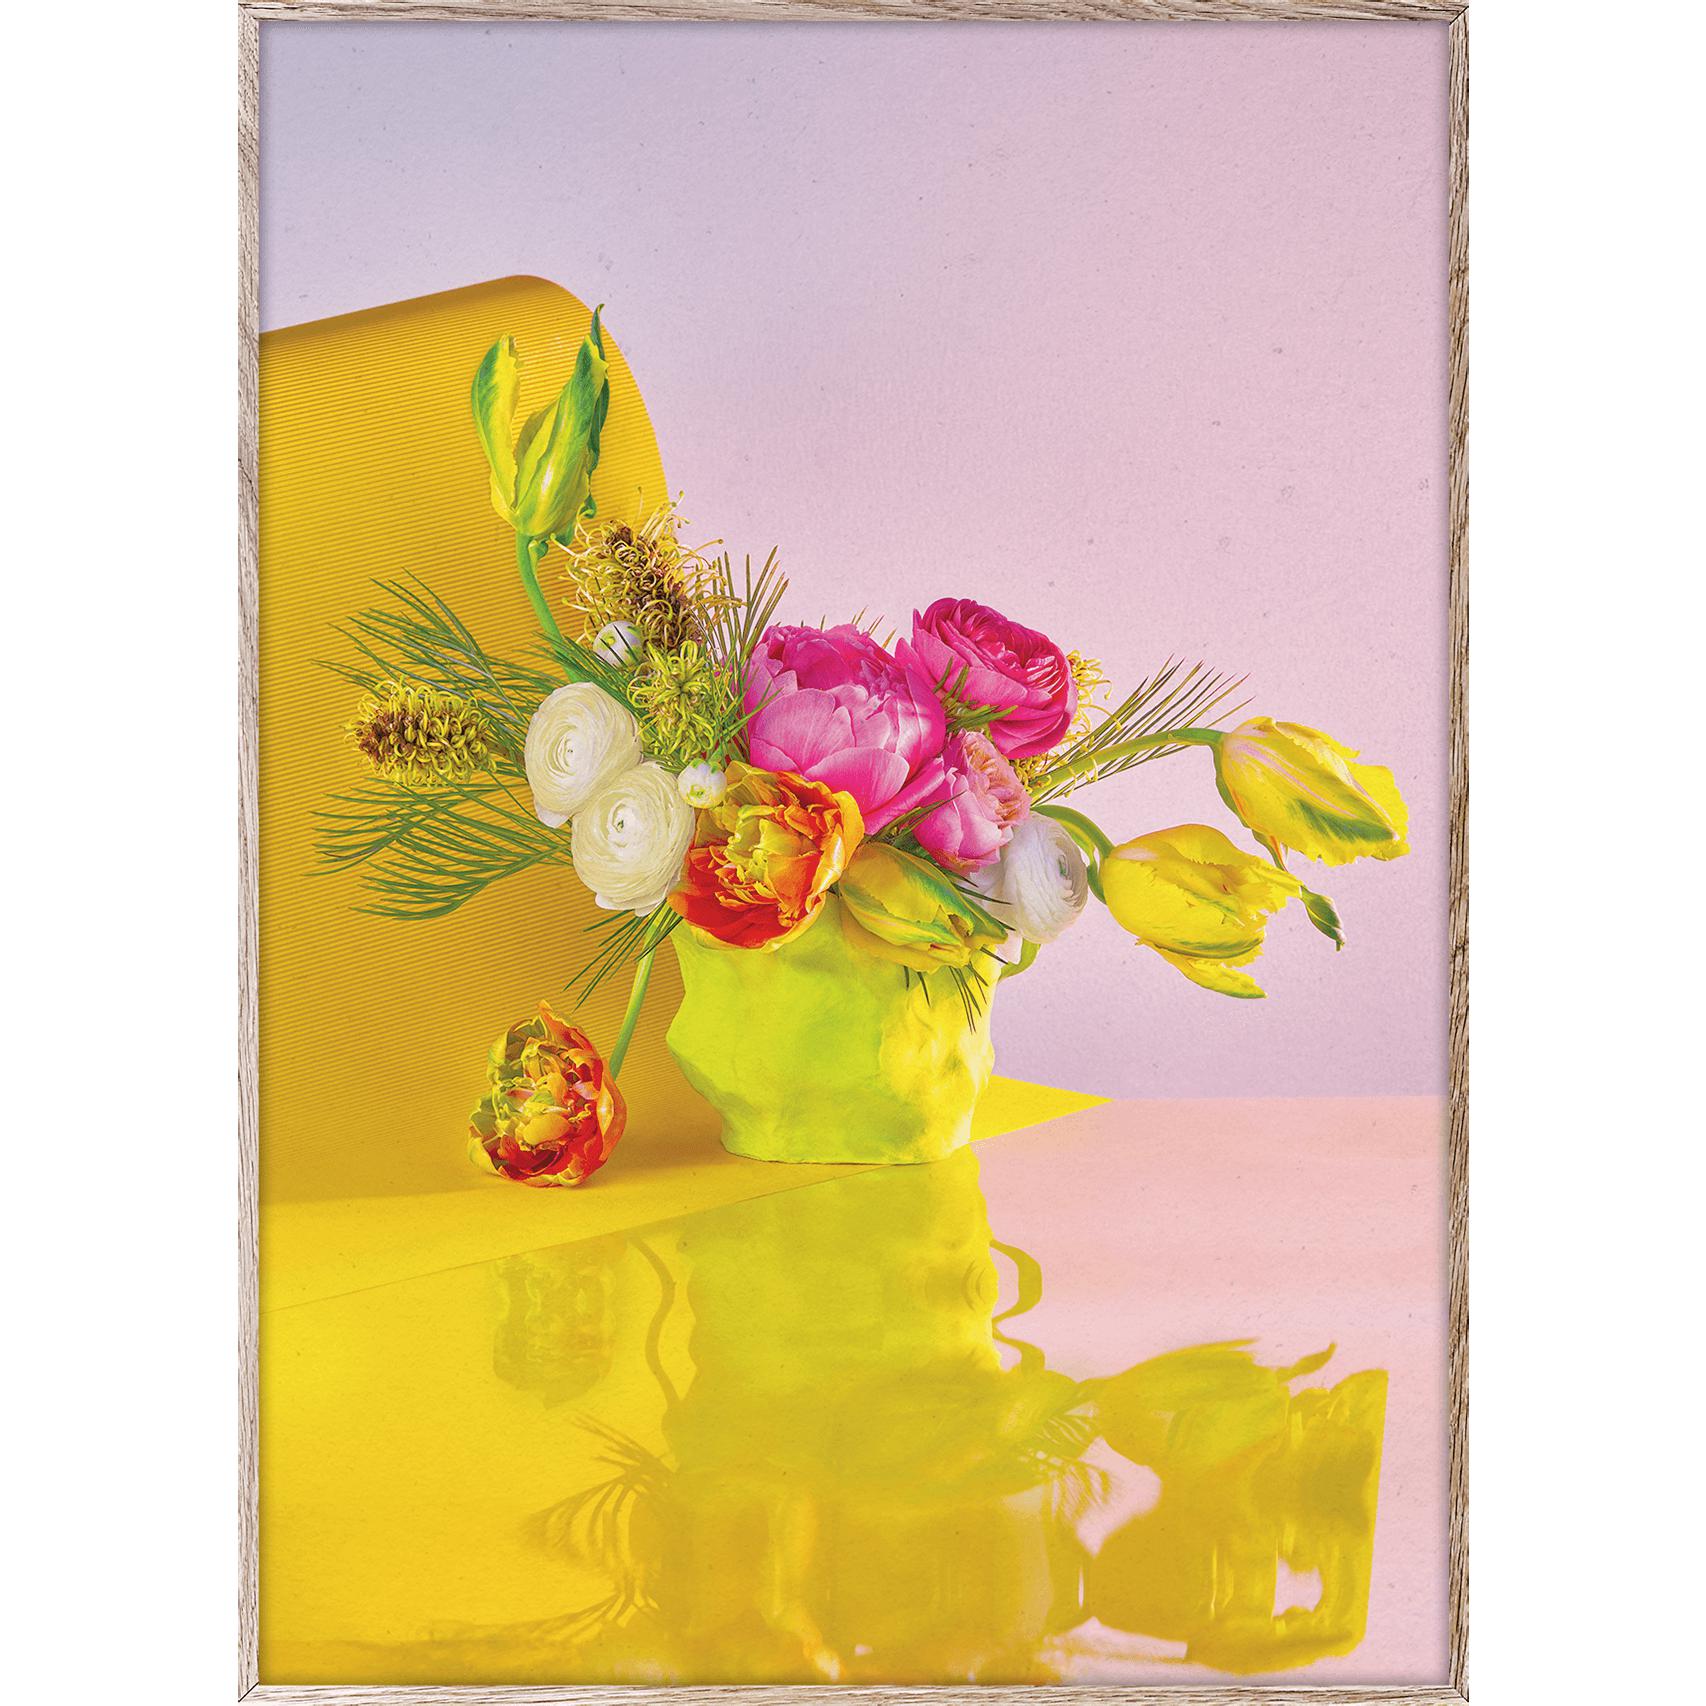 Paper Collective Bloom 03 Poster 30x40 Cm, Yellow